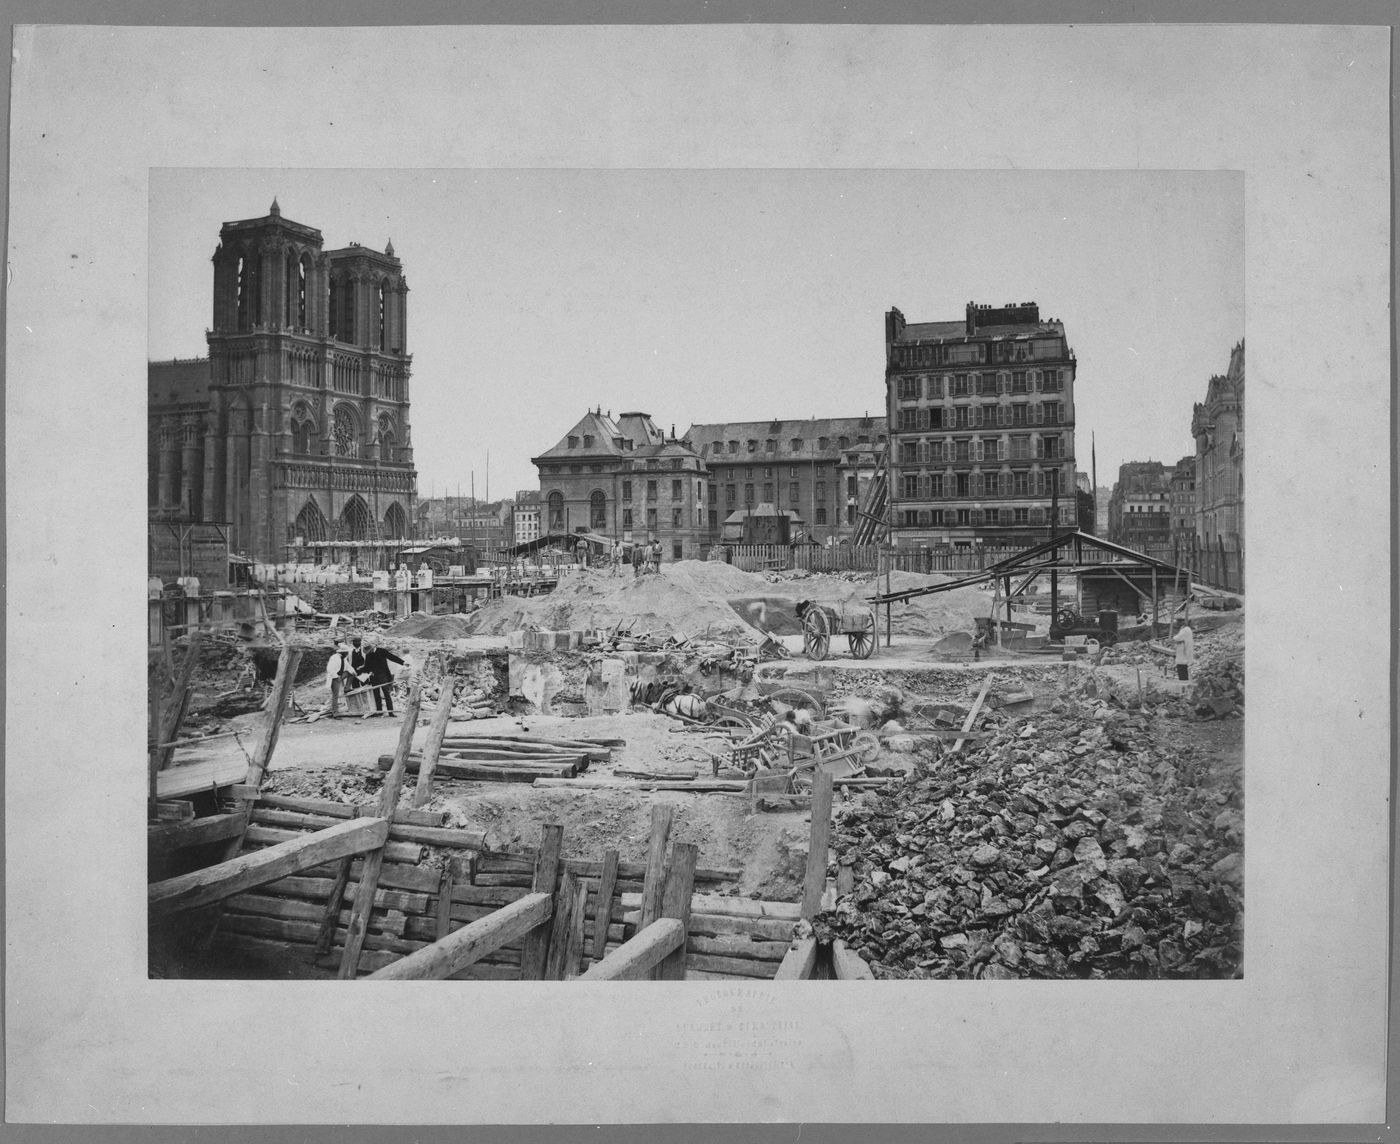 View of demolition work for the construction of the Hôtel-Dieu hospital opposite the Notre Dame, Paris, France